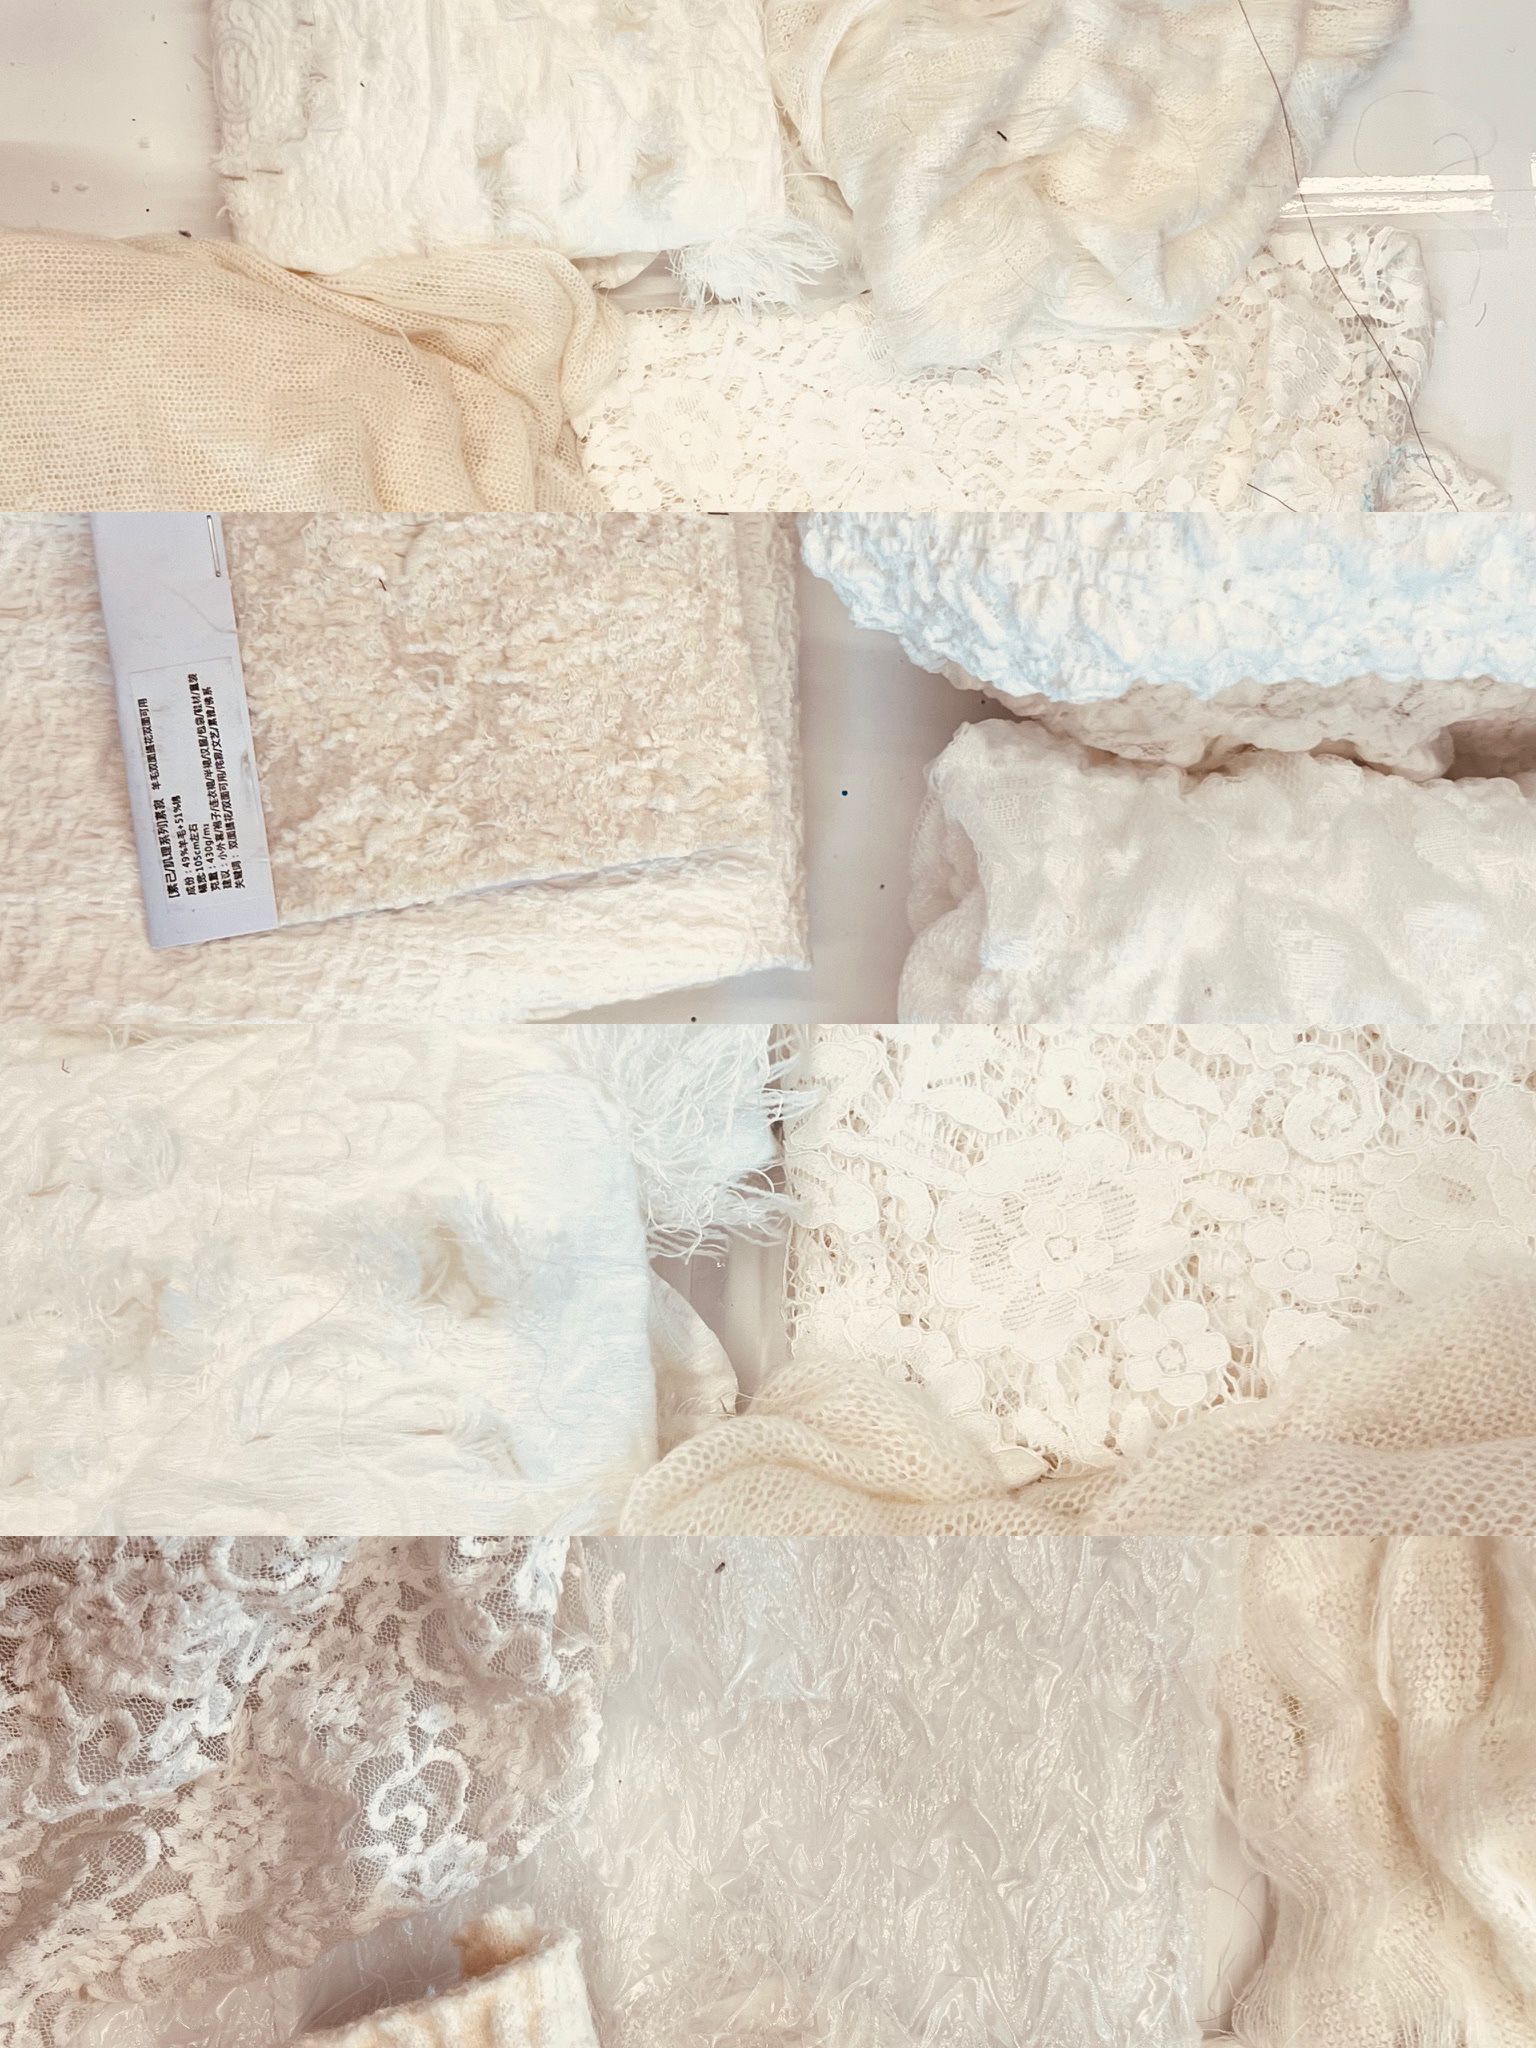 Japanese Designer White/Ivory Lace&Textured & Knit Fabrics - Gently Used—Perfect for craft